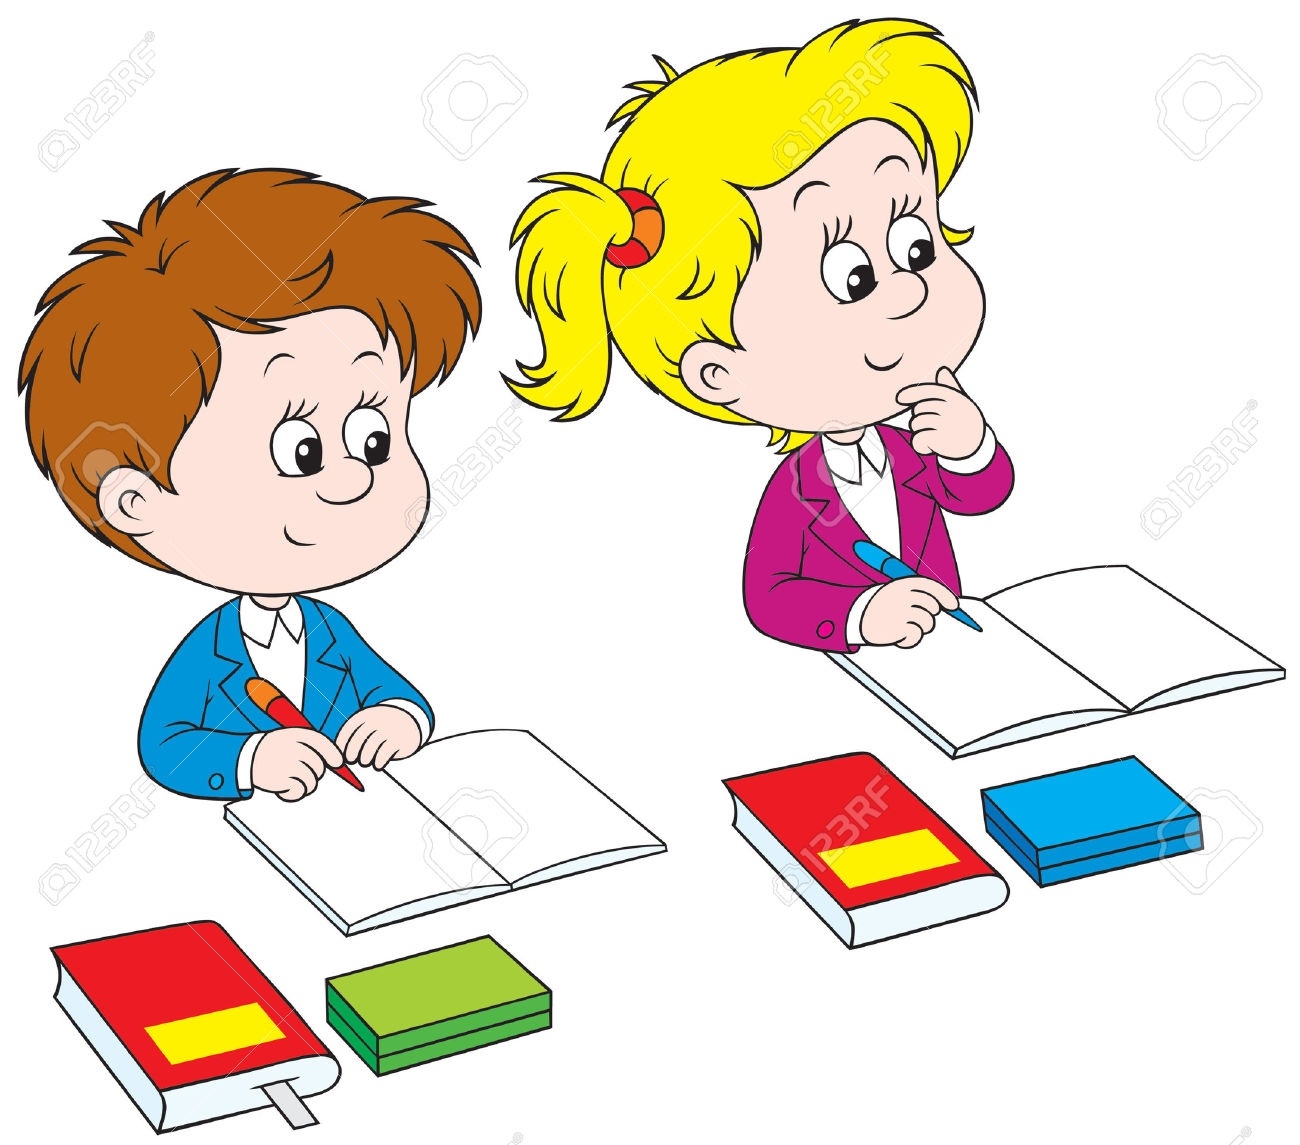 Awesome of kids letter. Children clipart writing